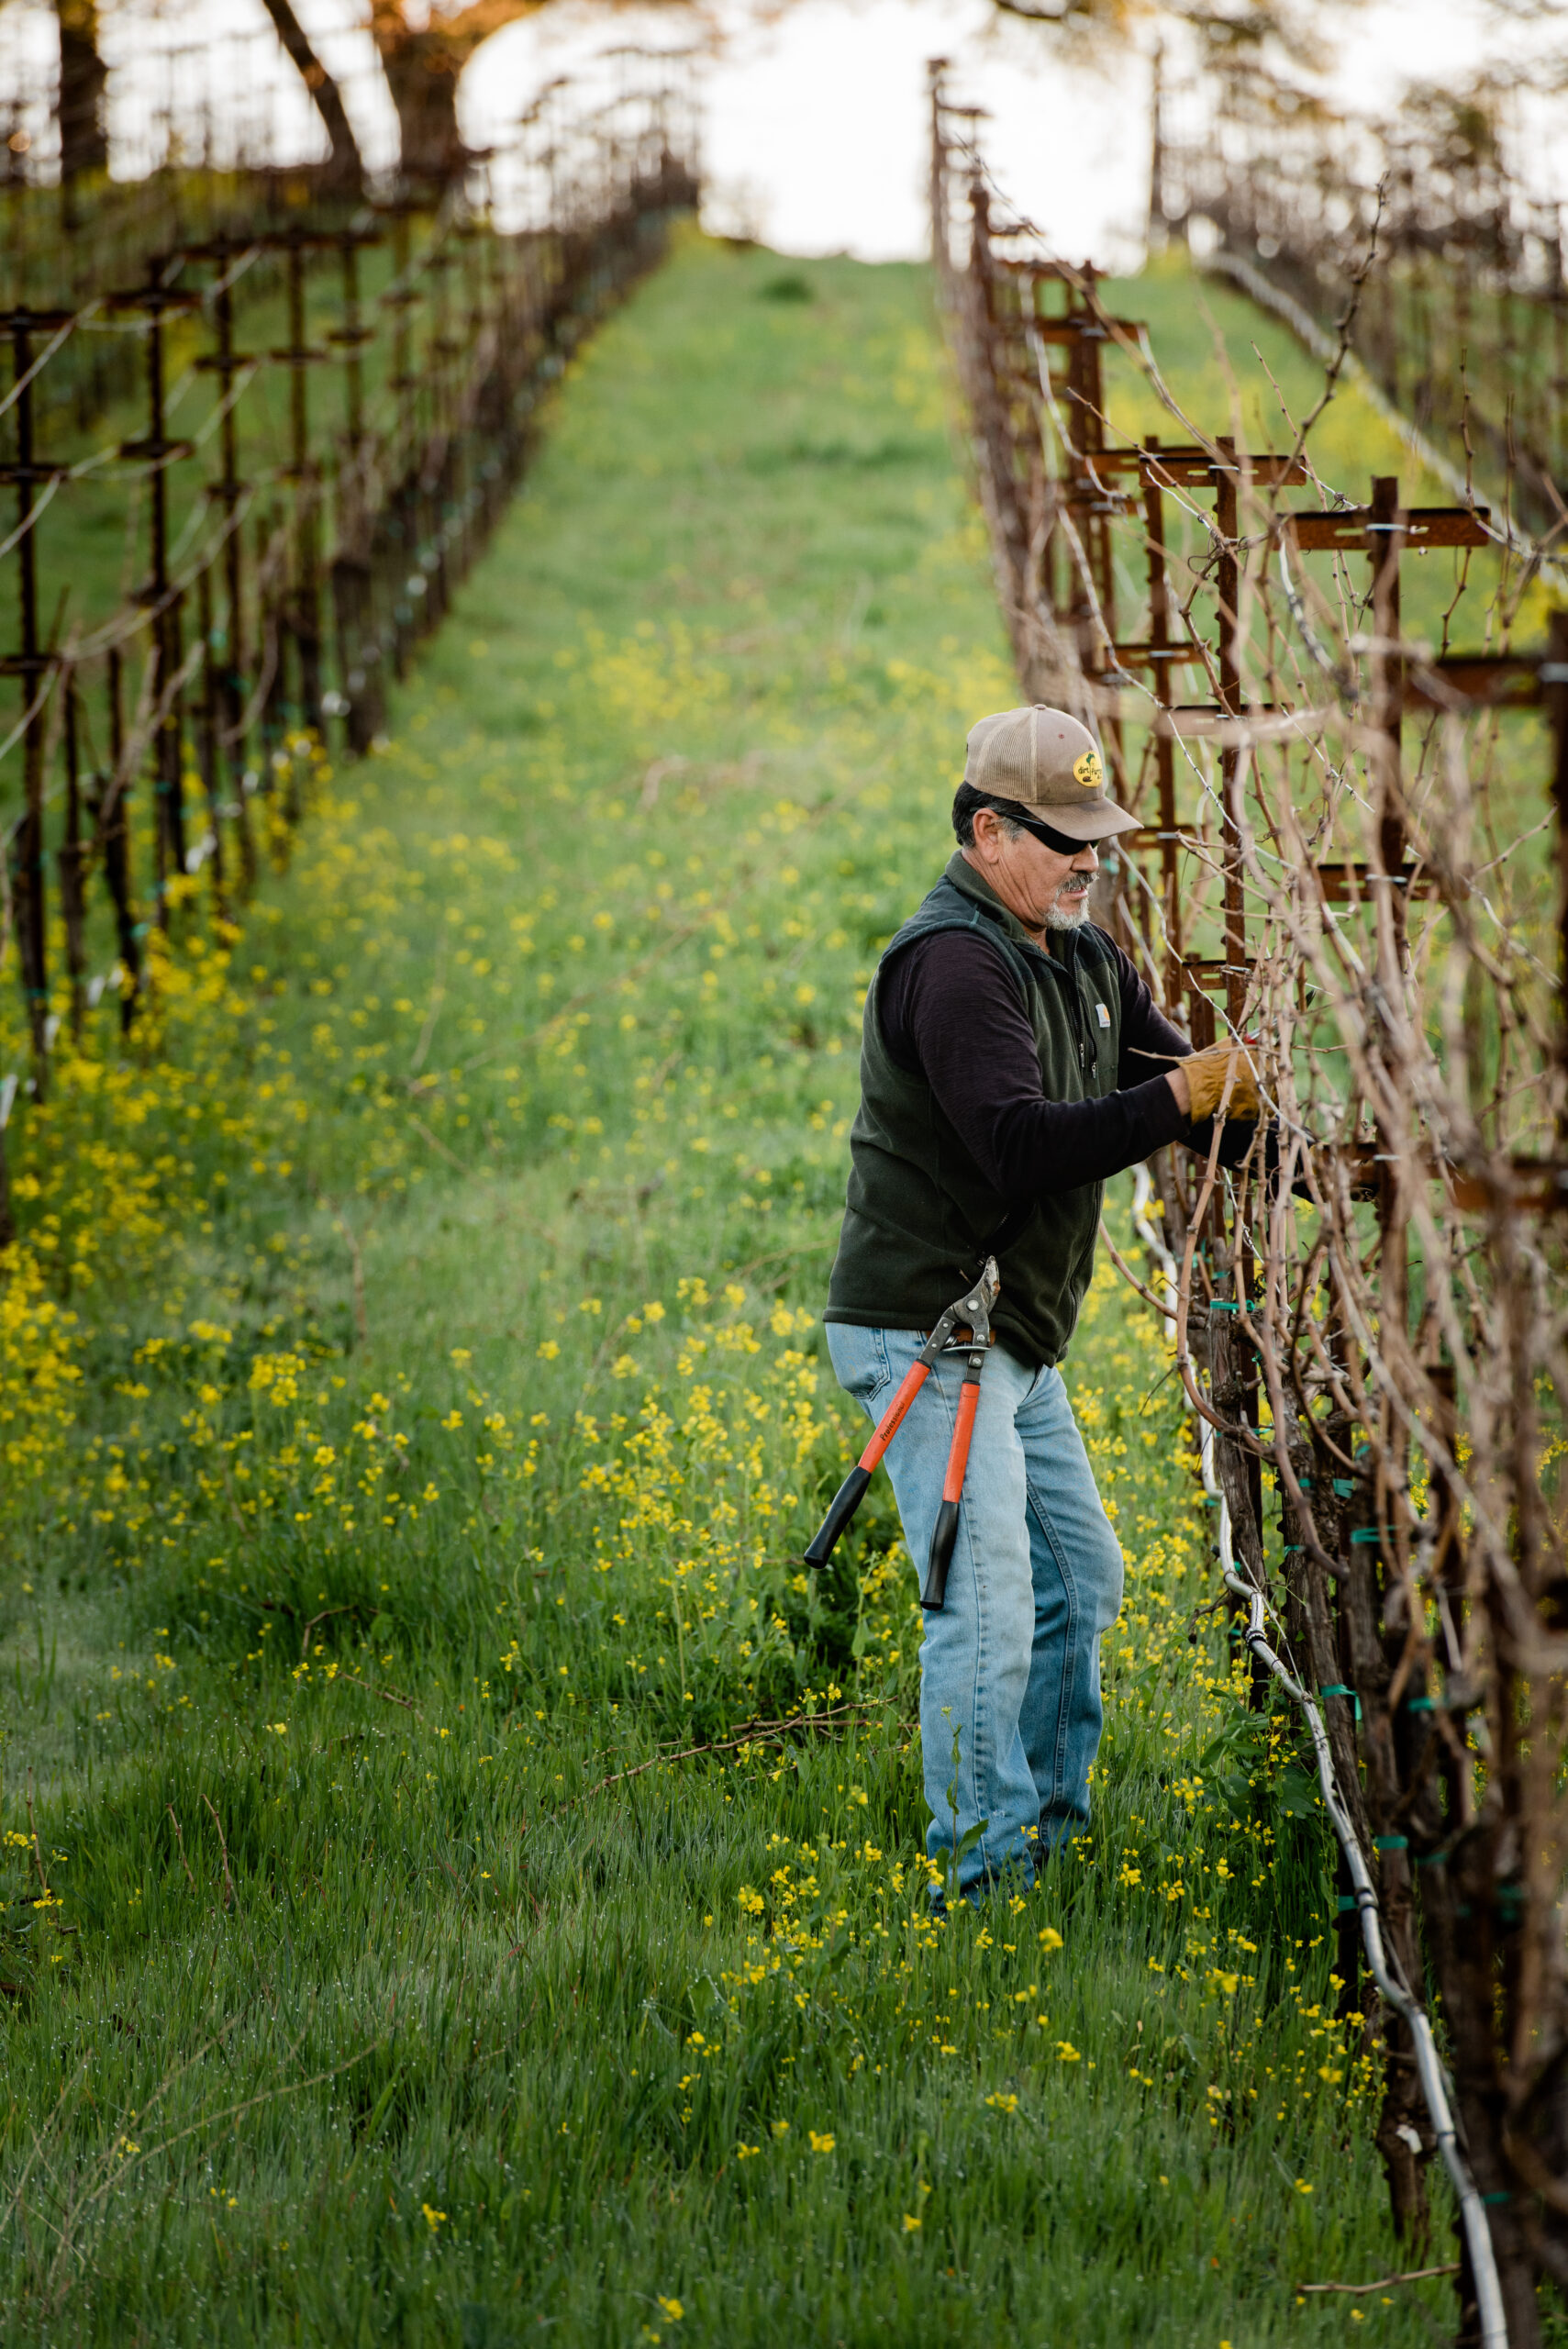 Rene Munoz has been with Kunde since 1990 and is and brings much expertise to vienyard leadership and management. He's considered the "grape wisperer" for his ability to read a vineyard.